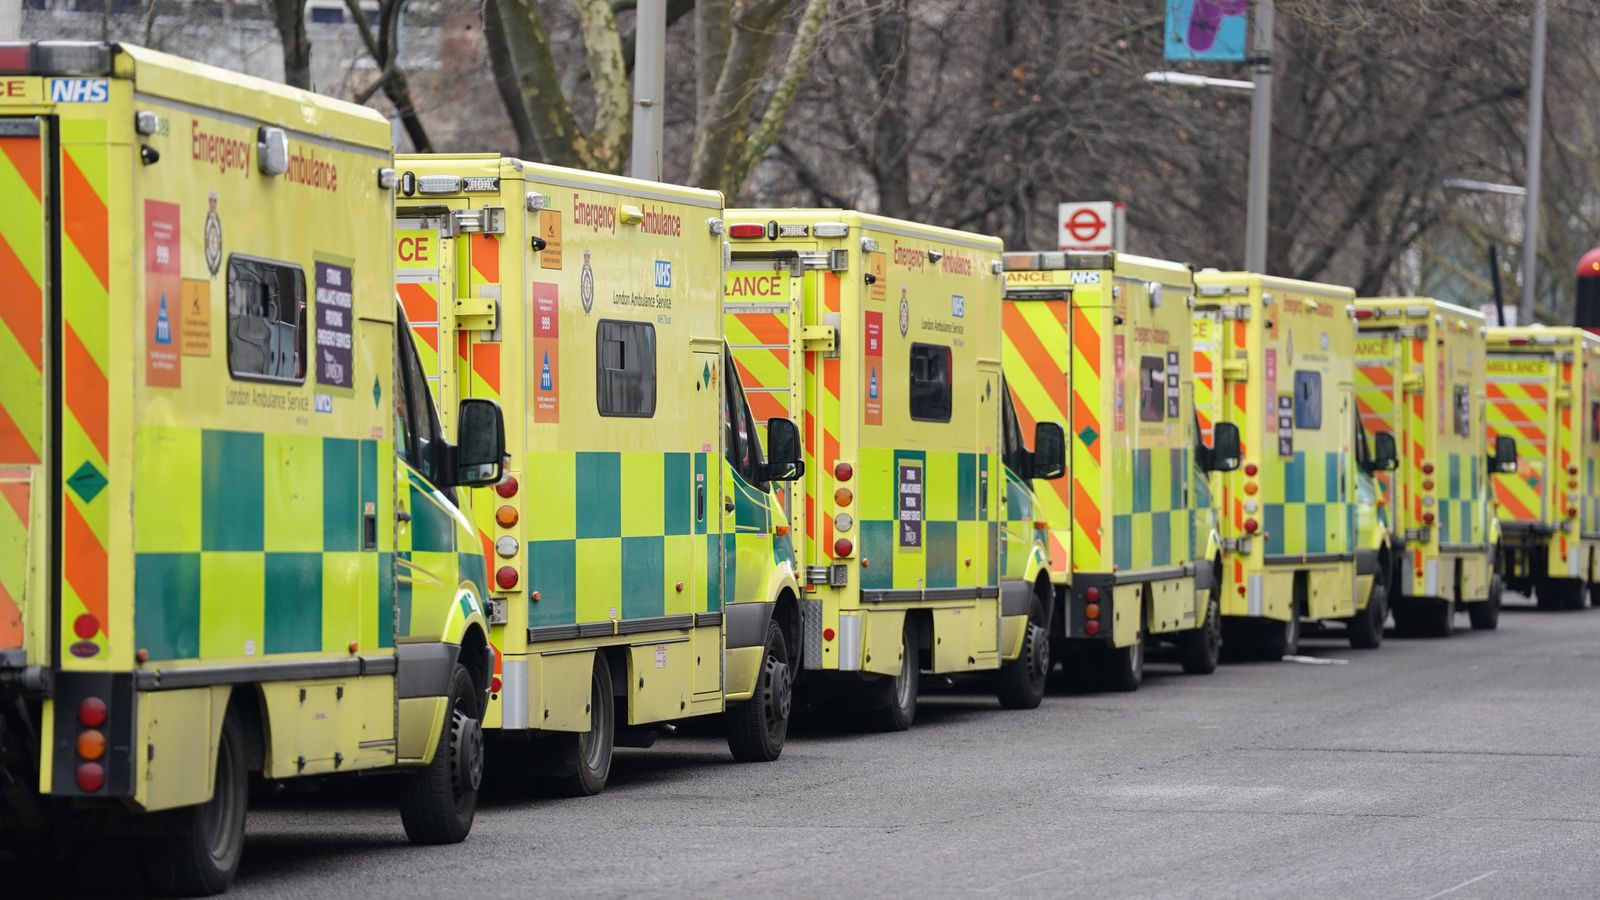 Patients waited up to two-and-a-half days for ambulances - and 40 hours to get into A&E